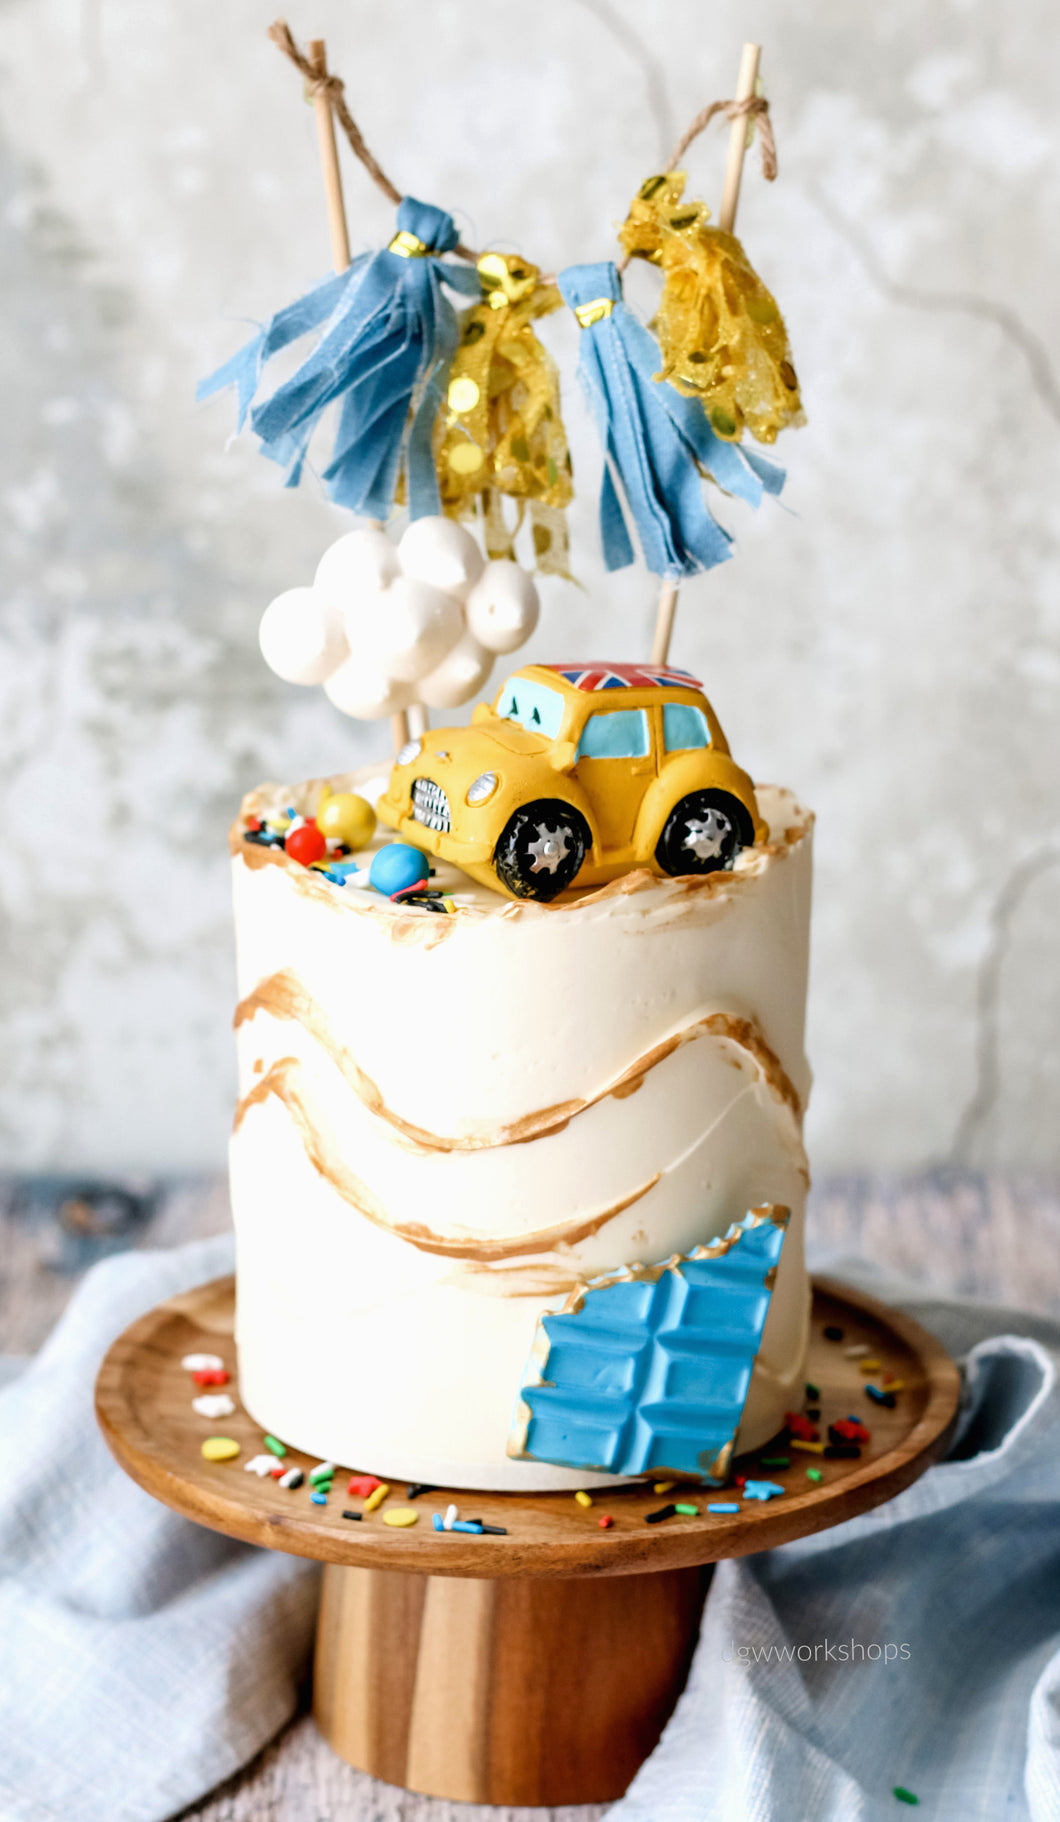 Hands-on Vroom Vroom! Funfetti Cookie Dough Cake with Low-Sugar Swiss Meringue Buttercream